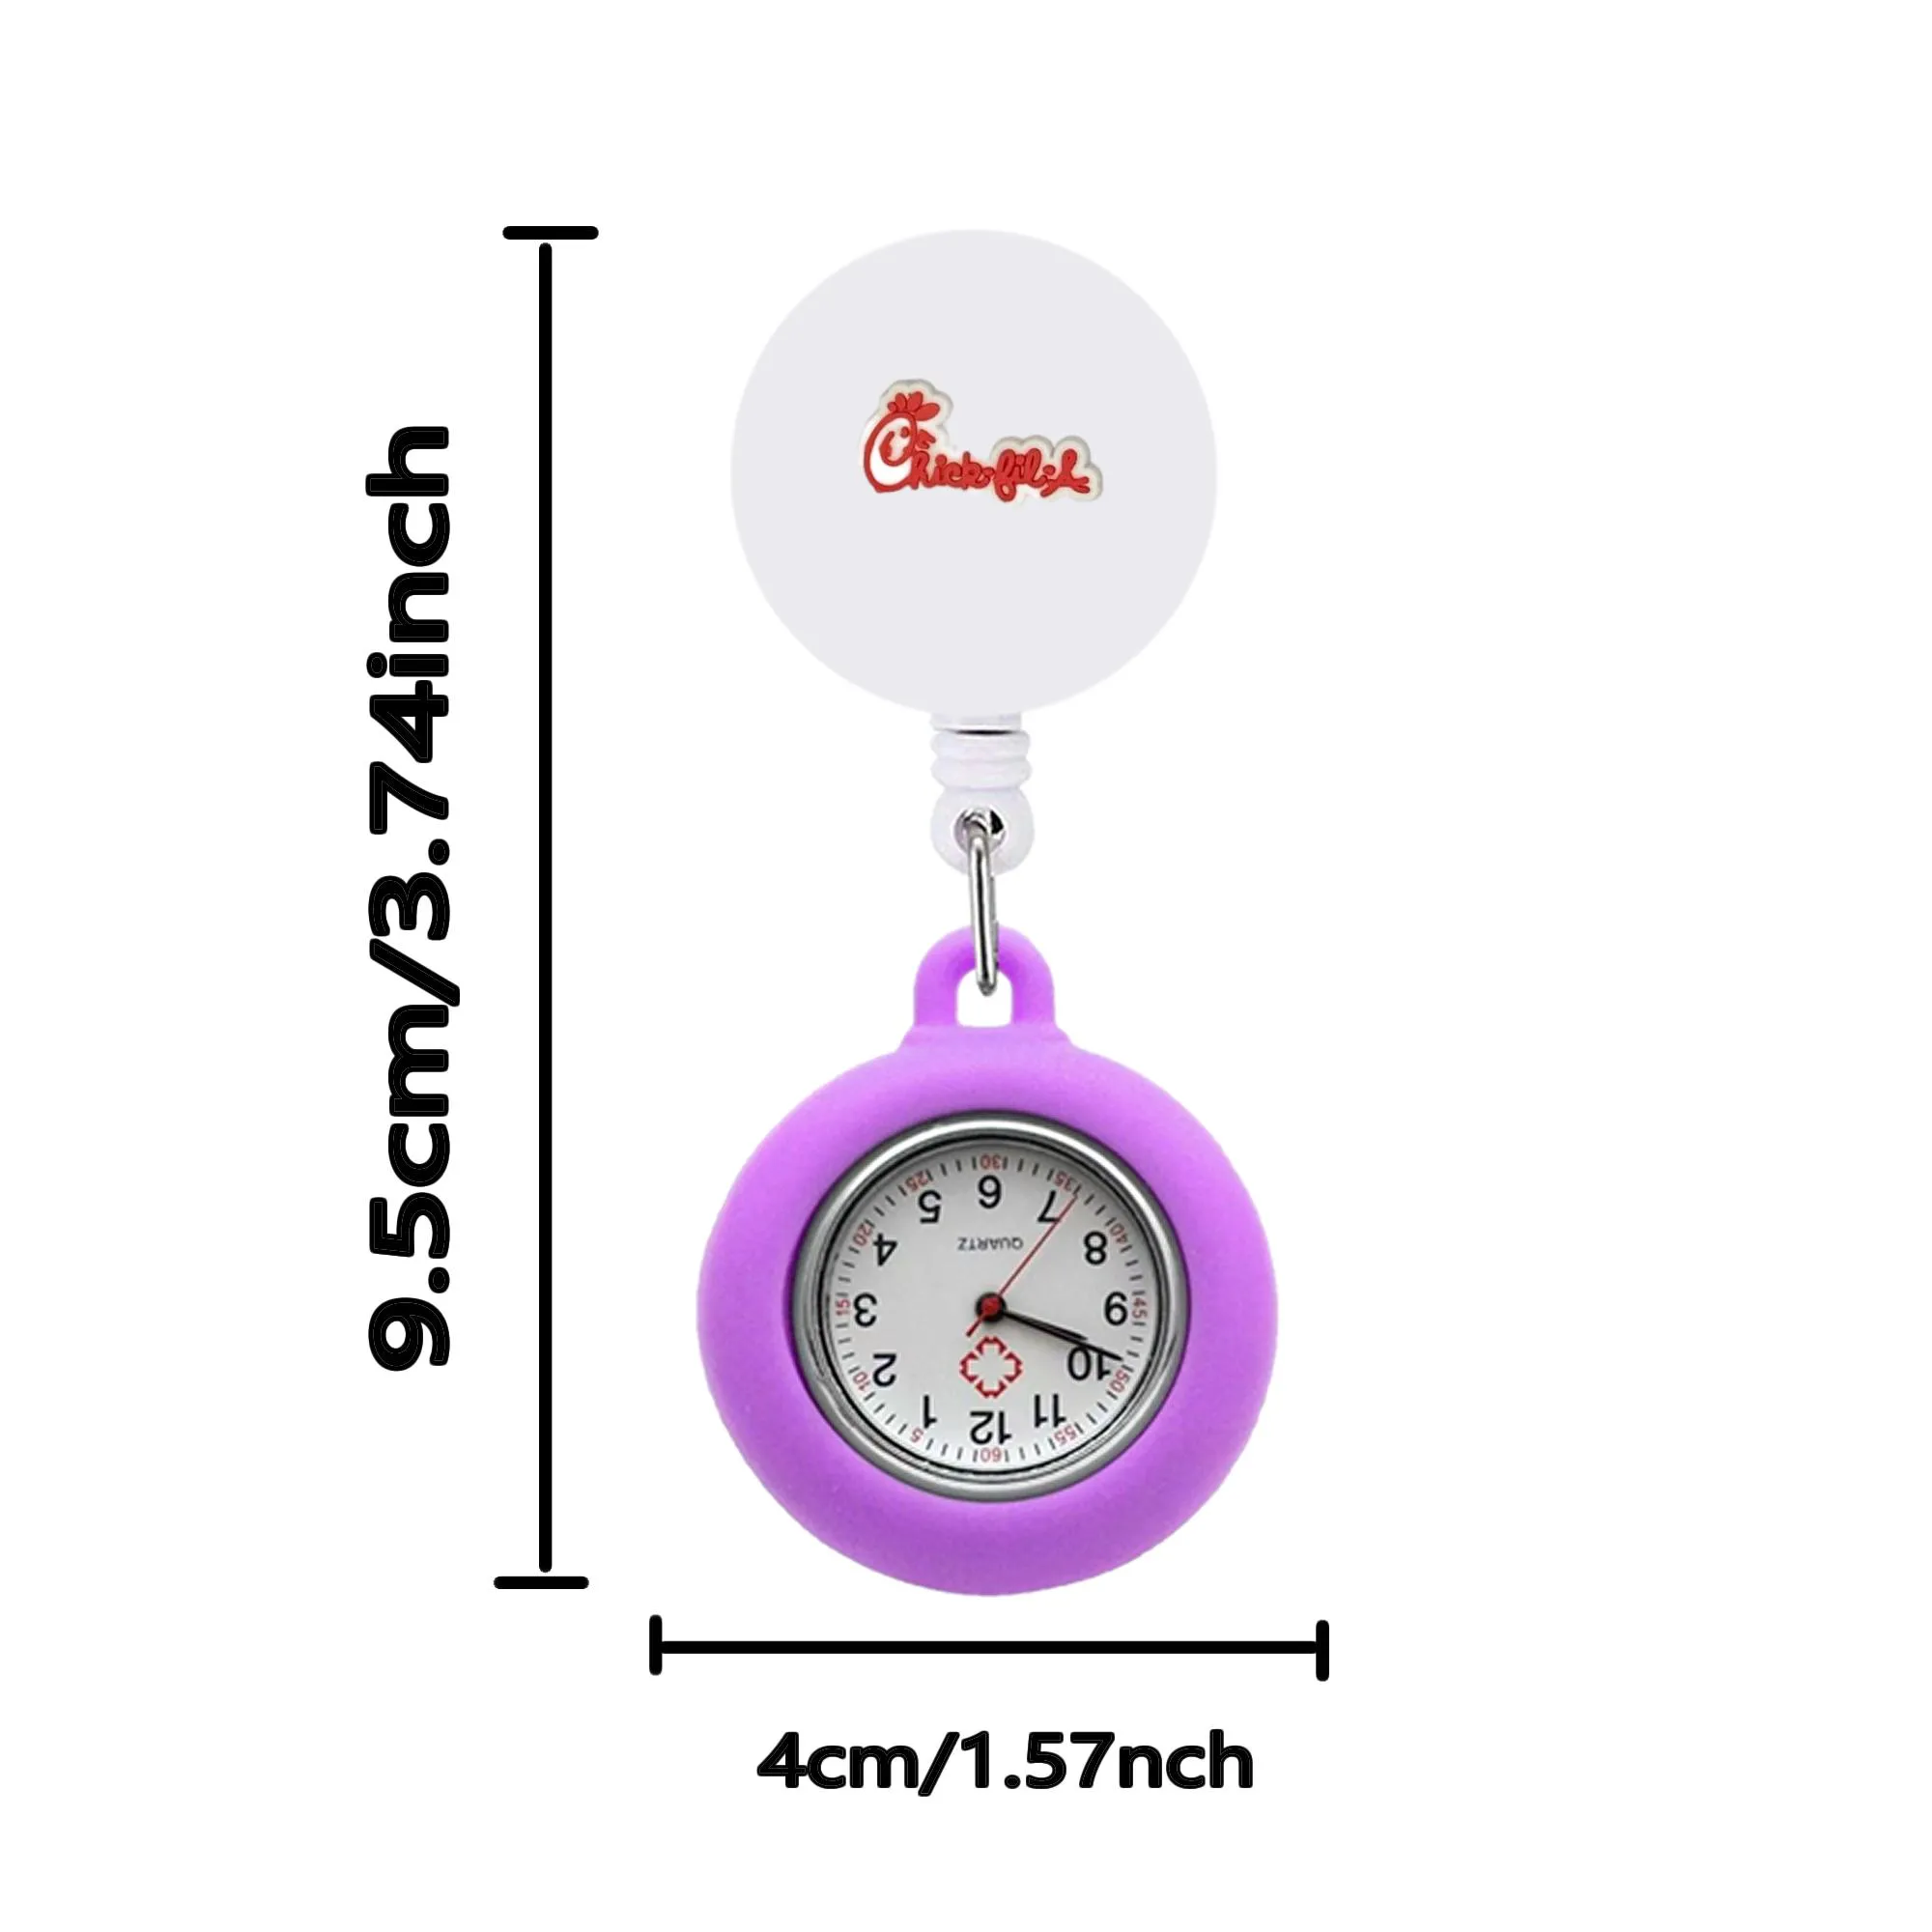 fule chicken clip pocket watches clip-on hanging lapel nurse watch fob for nurses alligator medical hang clock gift retractable hospital workers badge reel